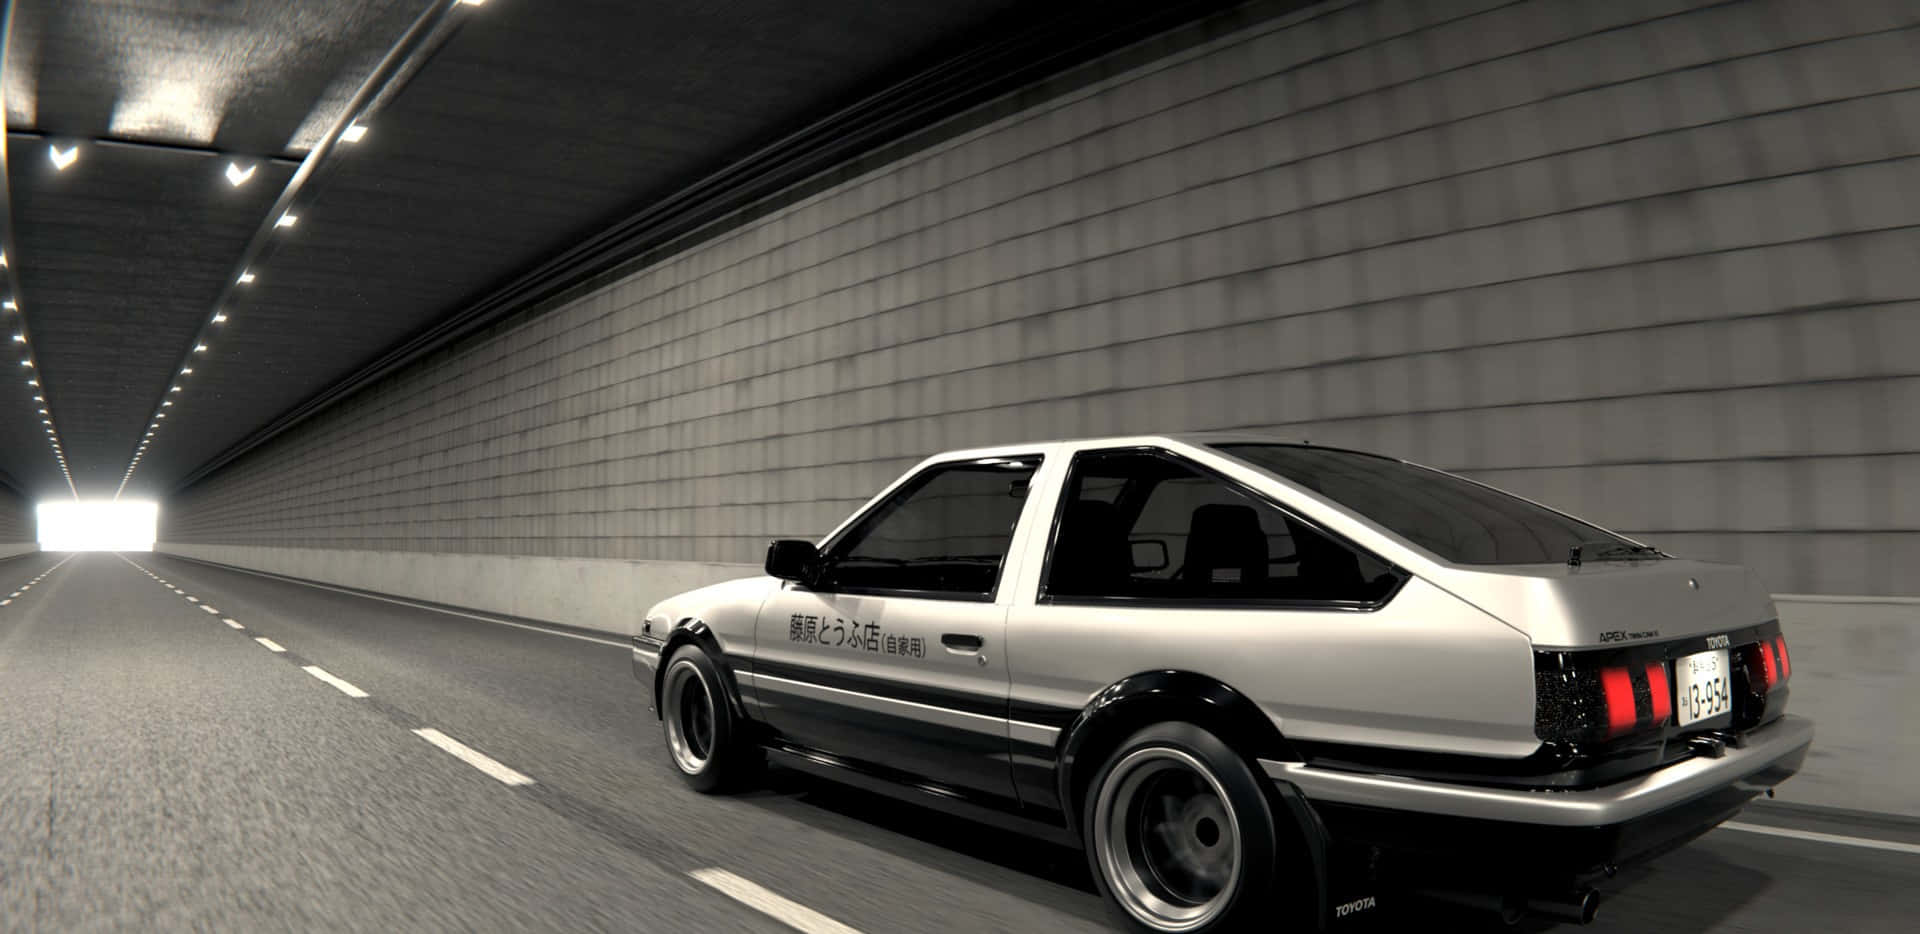 Toyota AE86 Inside Tunnel Initial D Background